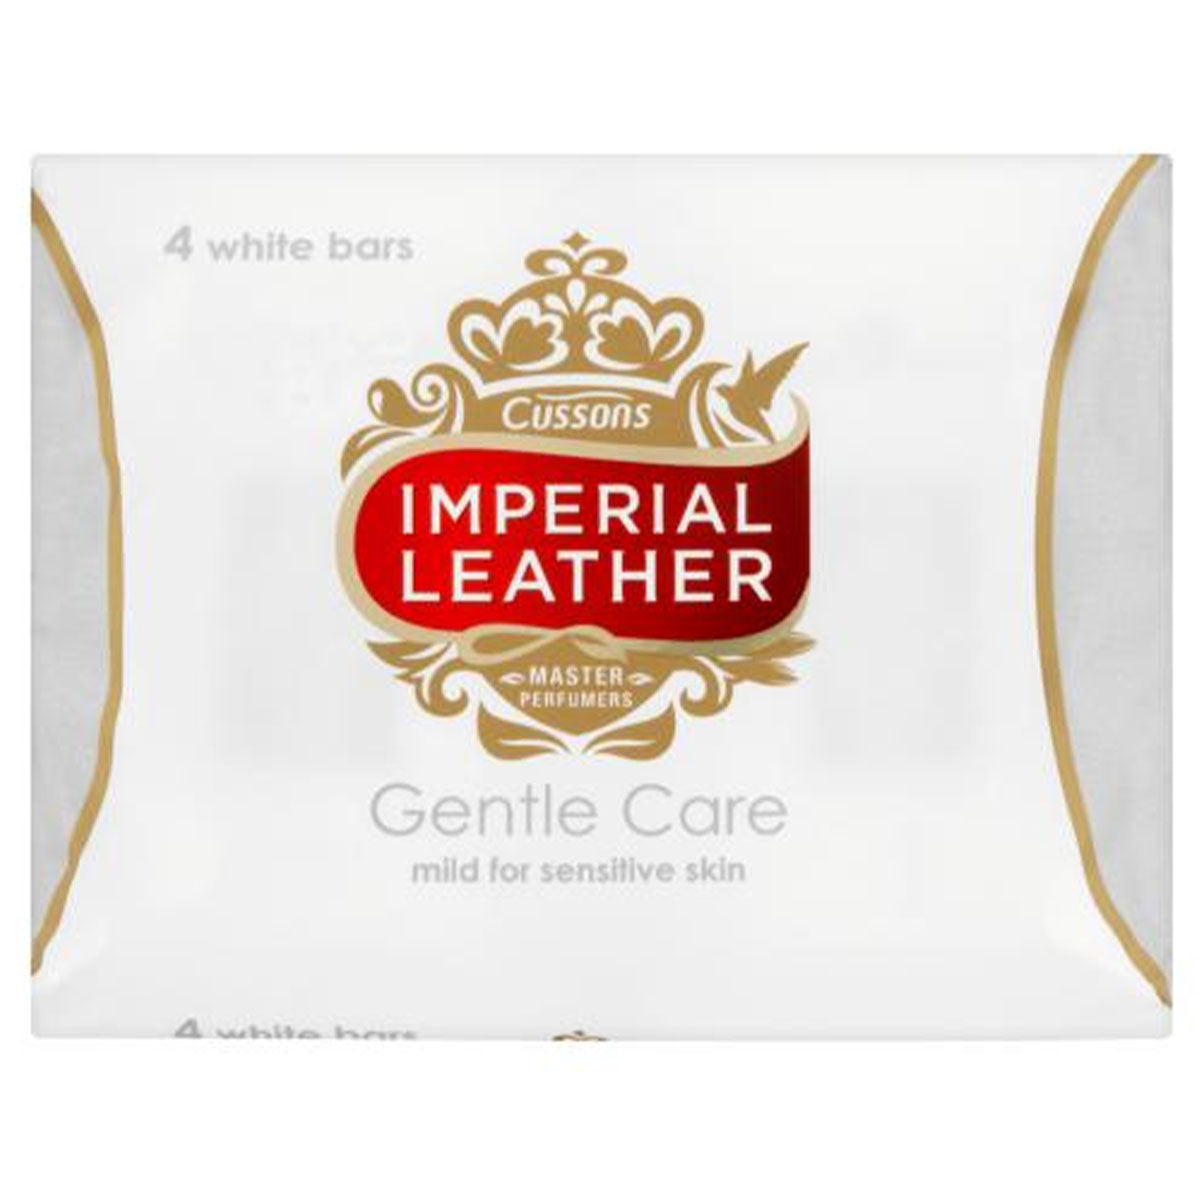 Cussons - Imperial Leather Soap Gentle - 4 x 100g - Continental Food Store